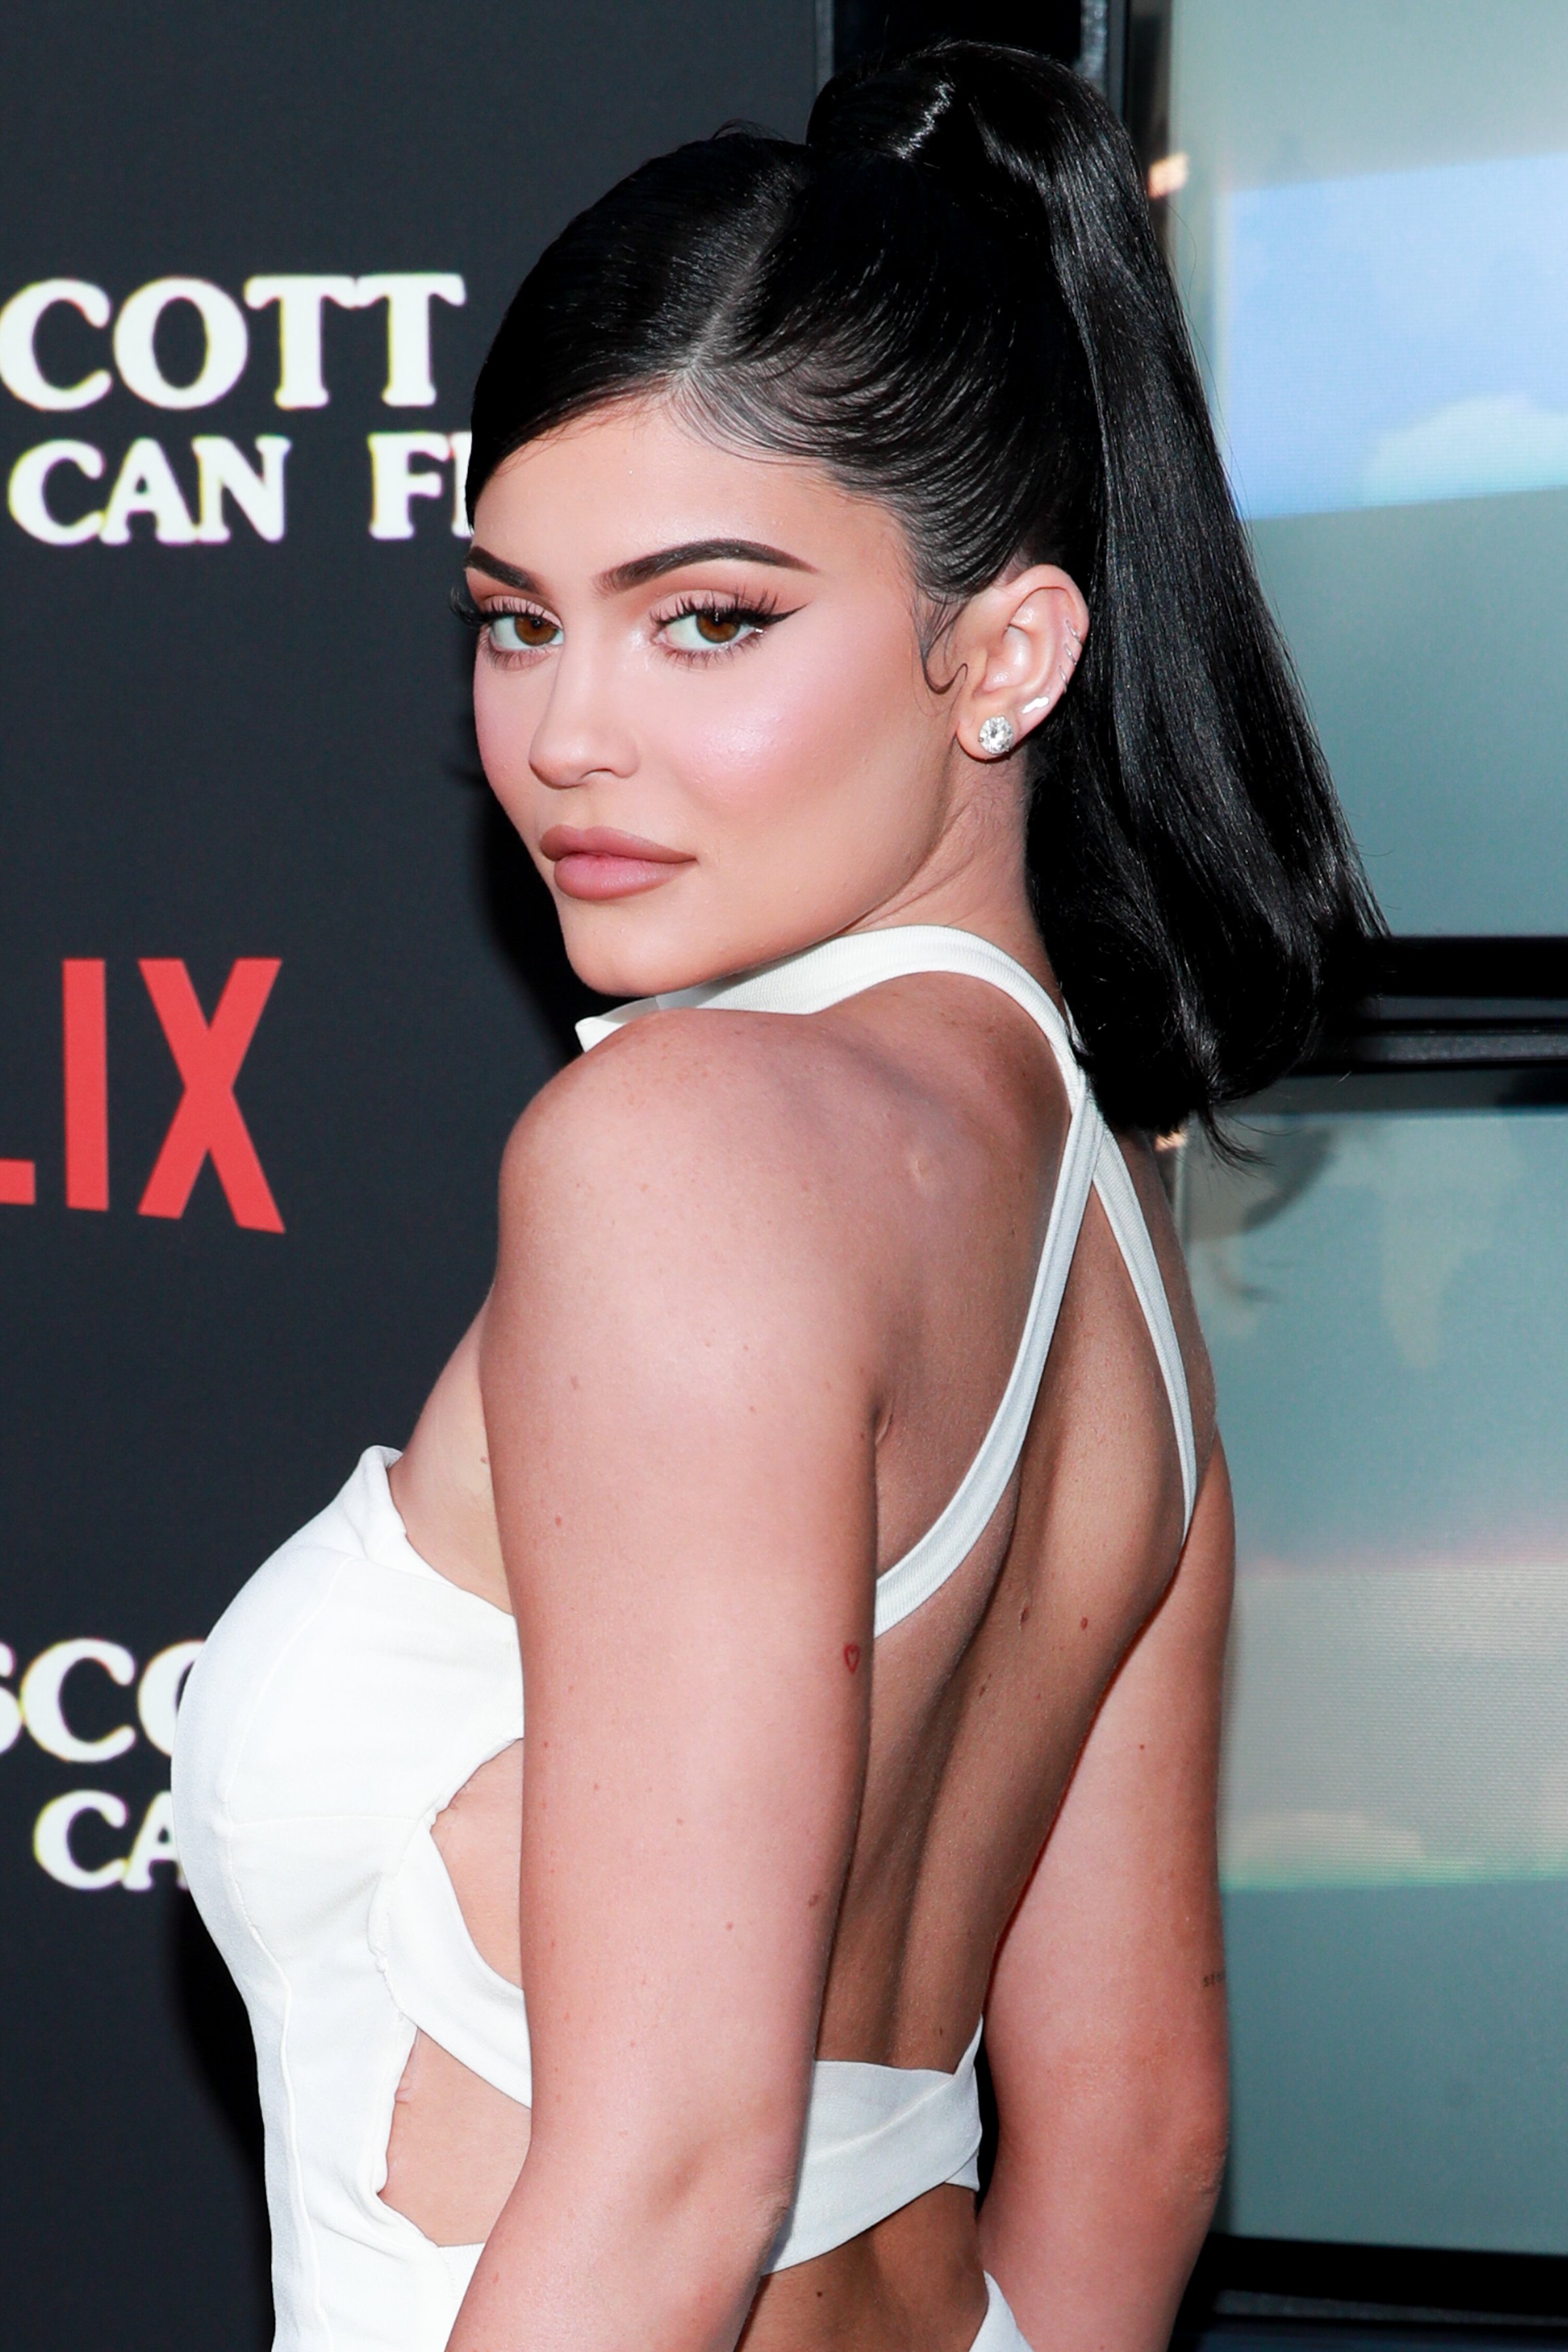 Kylie Jenner attends the premiere of Netflix's "Travis Scott: Look Mom I Can Fly" at Barker Hangar on August 27, 2019 | Photo: GettyImages